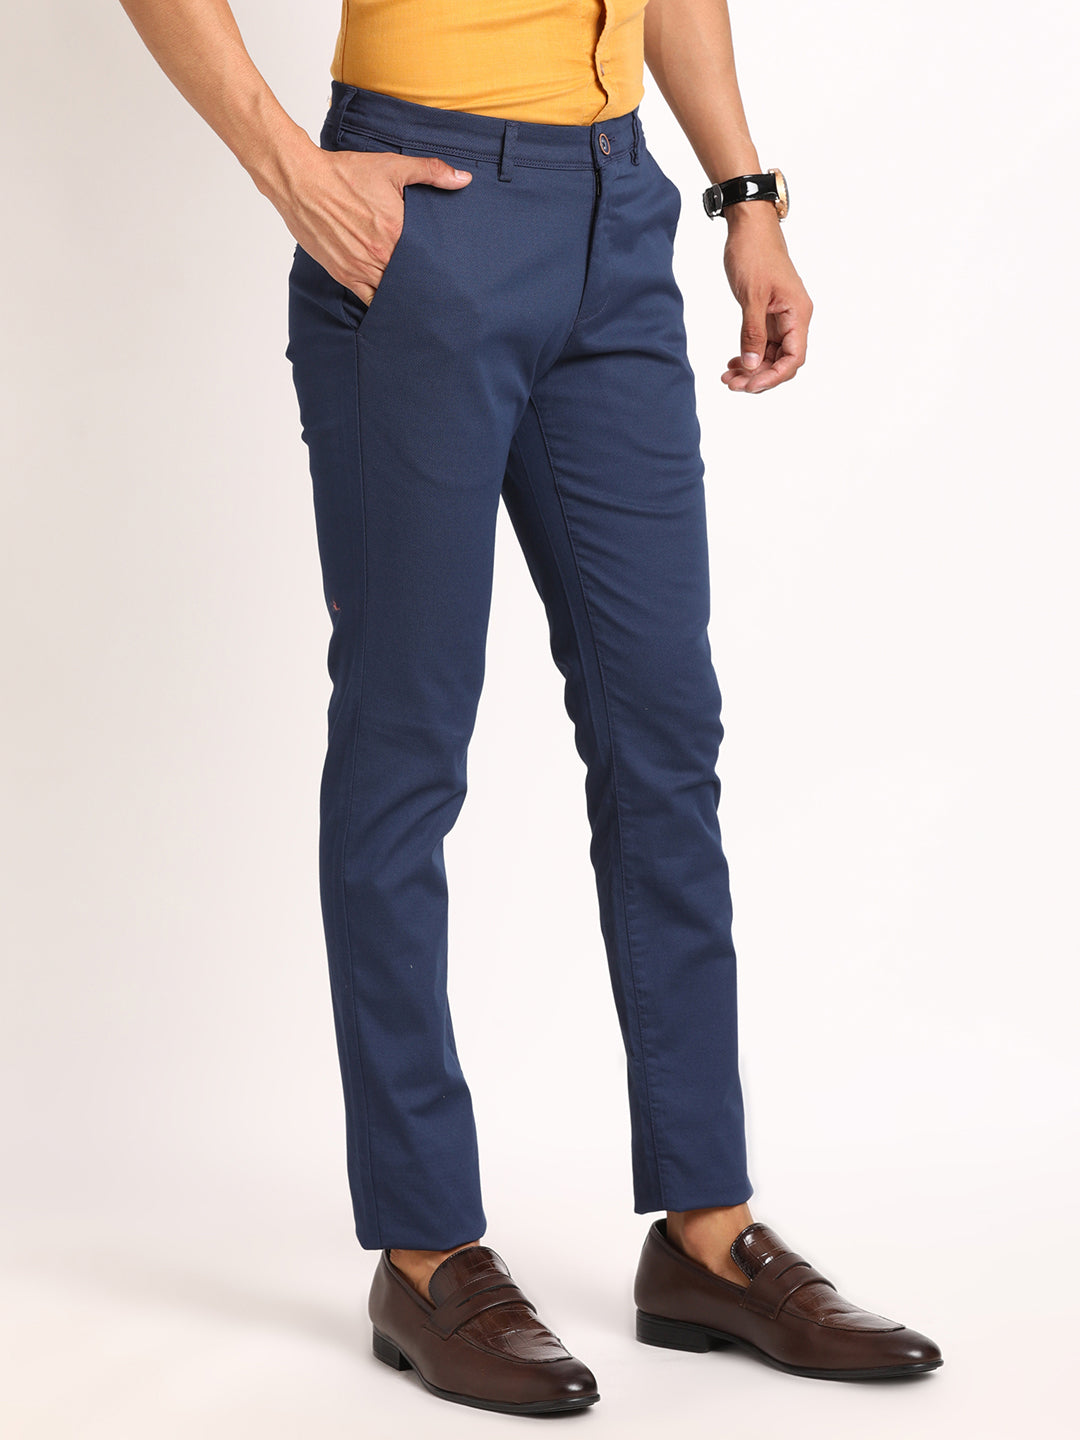 Cotton Stretch Blue Printed Narrow Fit Flat Front Casual Trouser